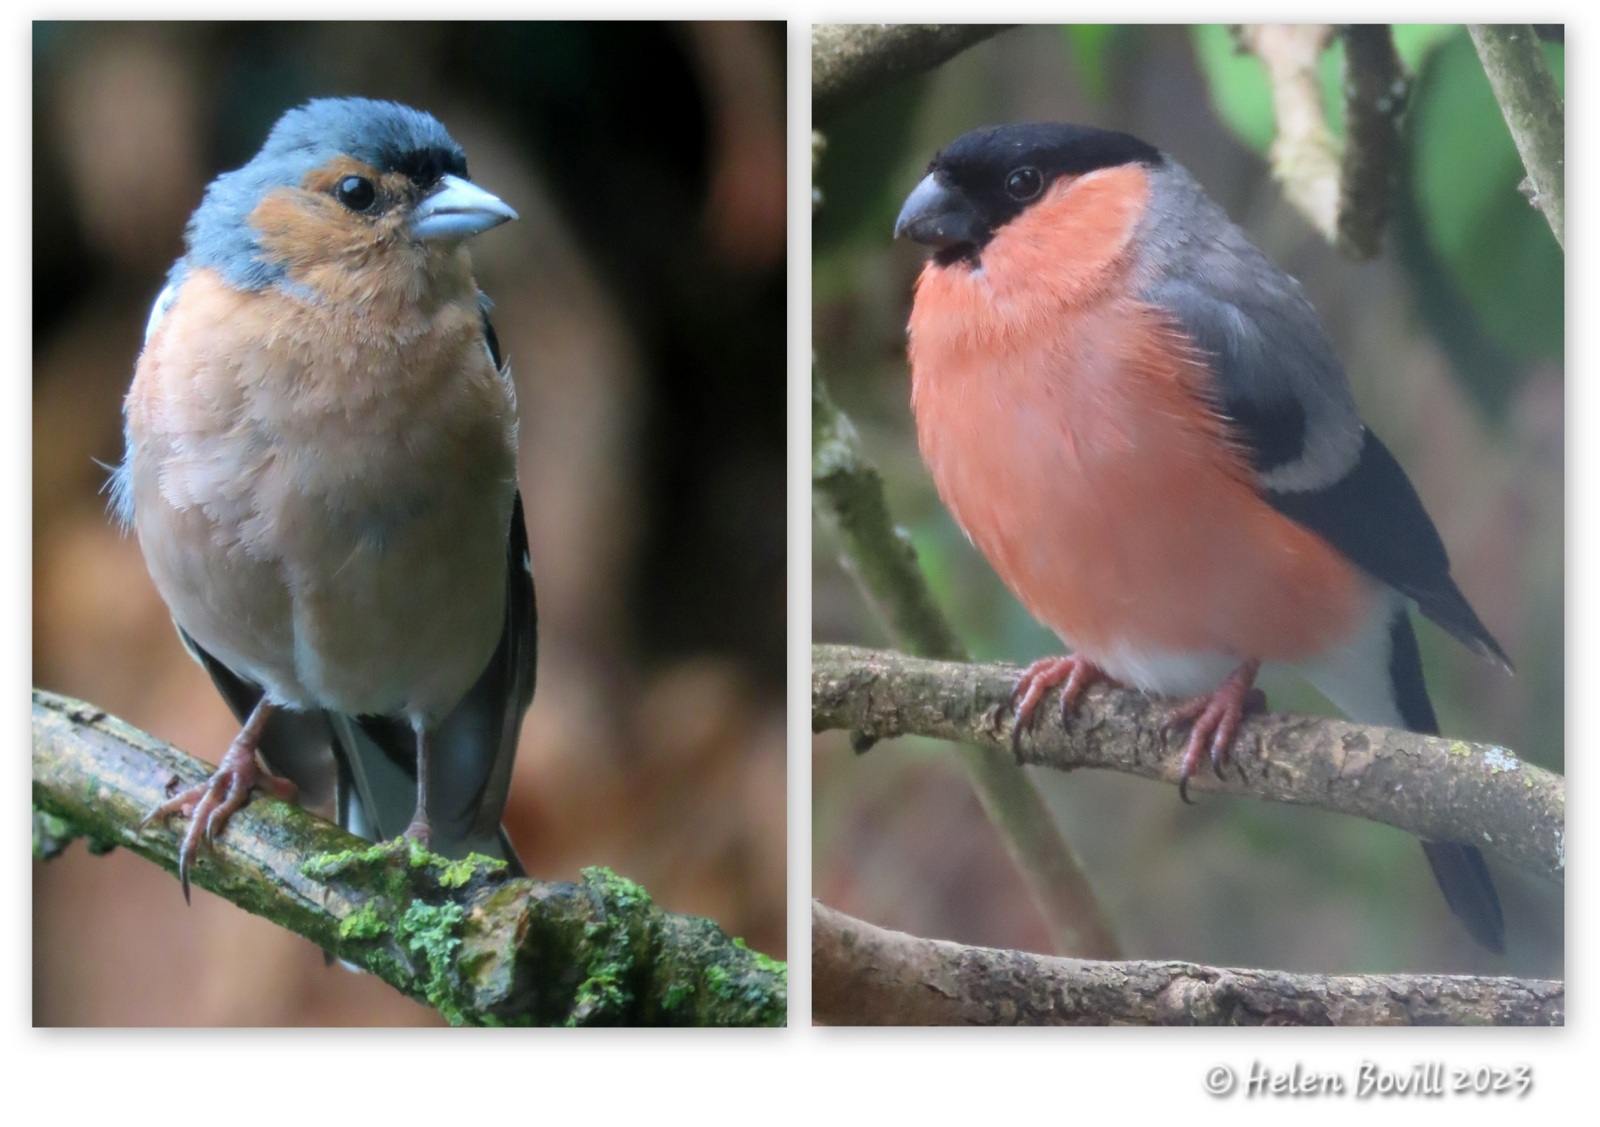 Two photos - one showing a male Chaffinch and the other showing a male Bullfinch